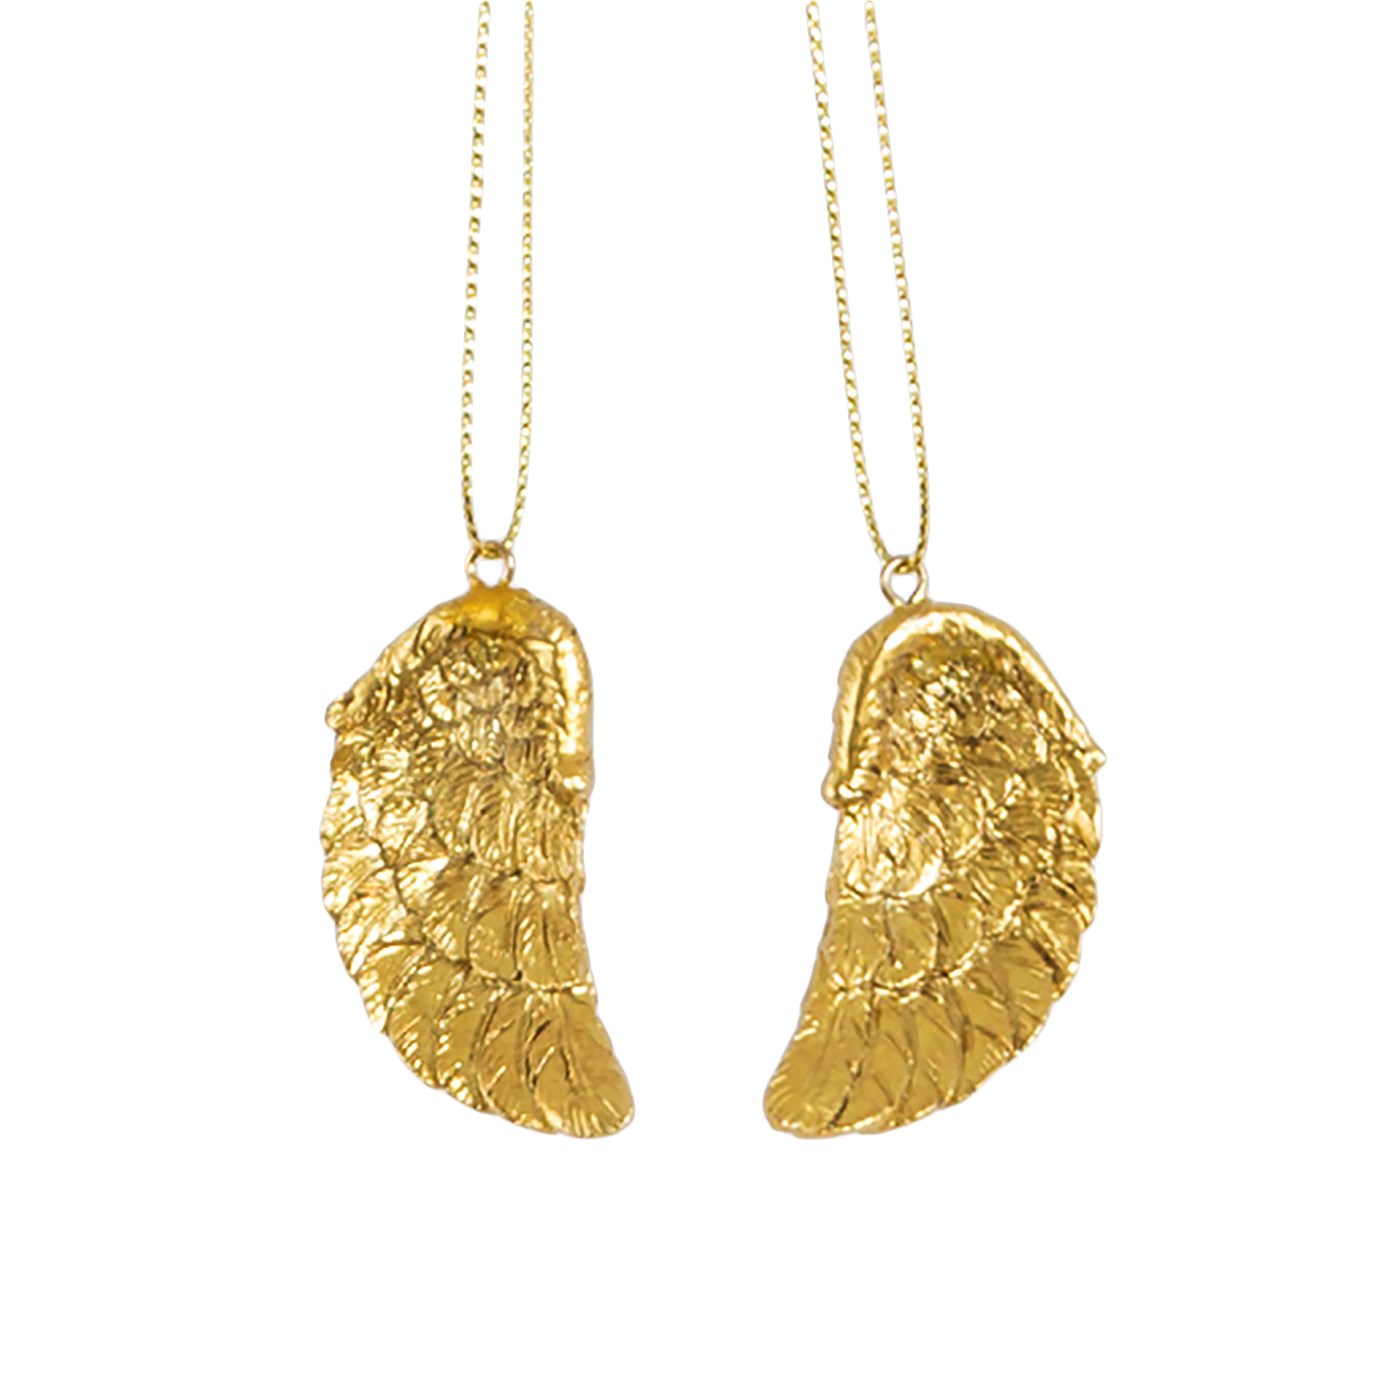 Pair of golden angel wings hanging decorations.